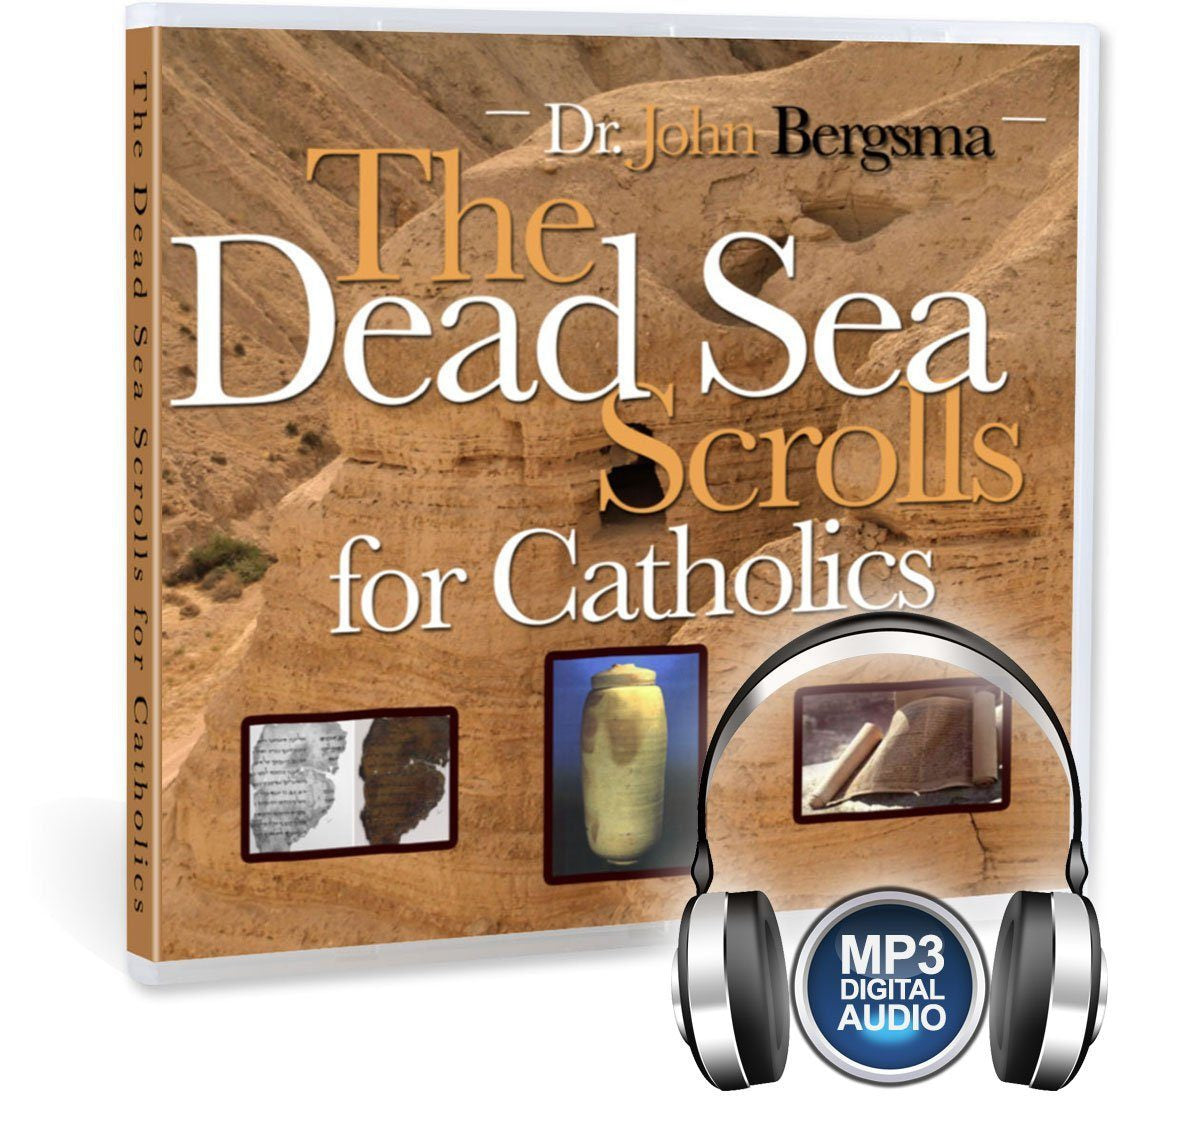 Get a brief few hour explanation of the Dead Sea Scrolls: What are they, how they were found, what difference does their finding make for our understanding of the Bible (CD).